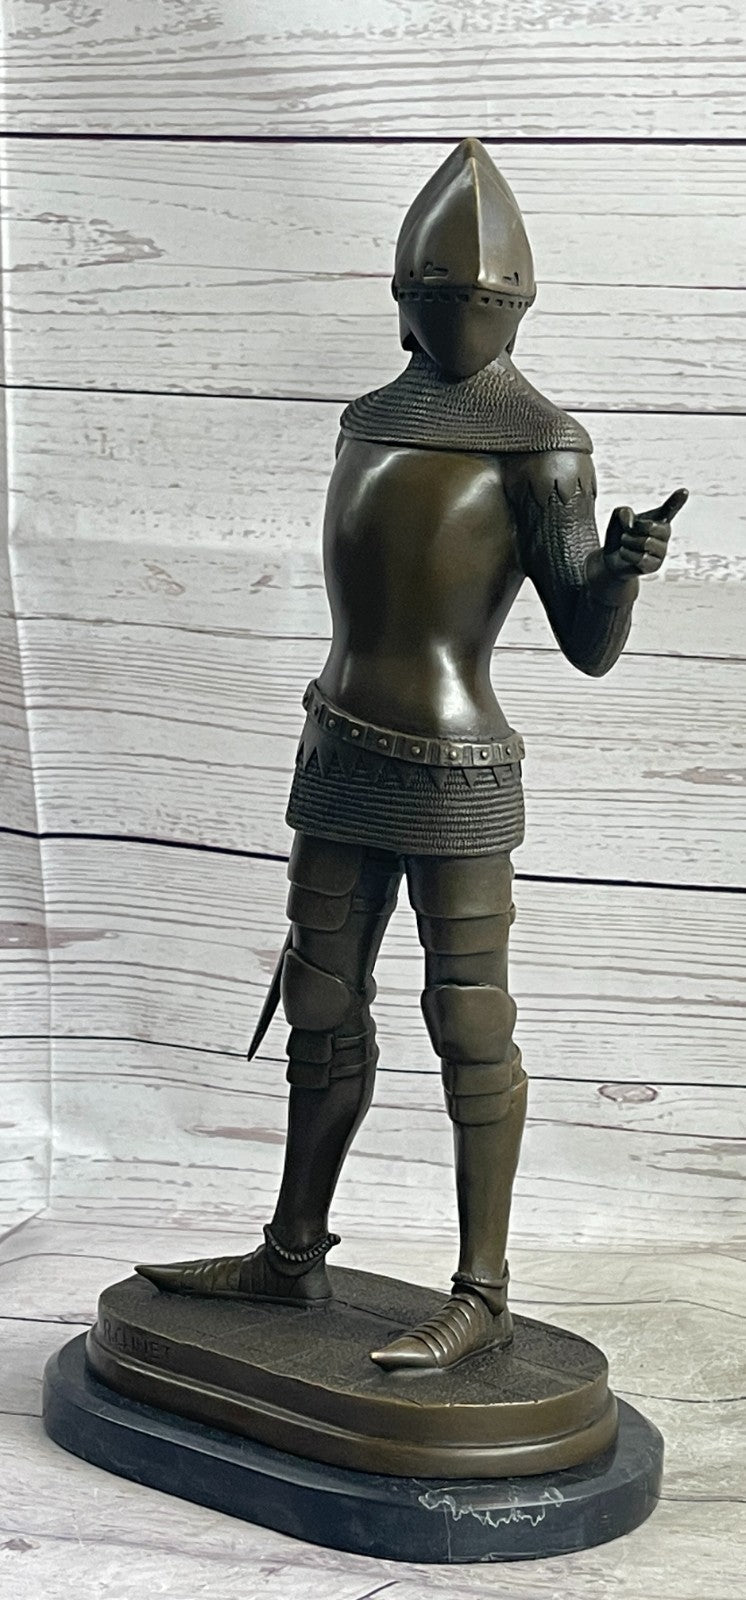 Hot Cast European Knight With Armor and Sword Bronze Sculpture Marble Figurine